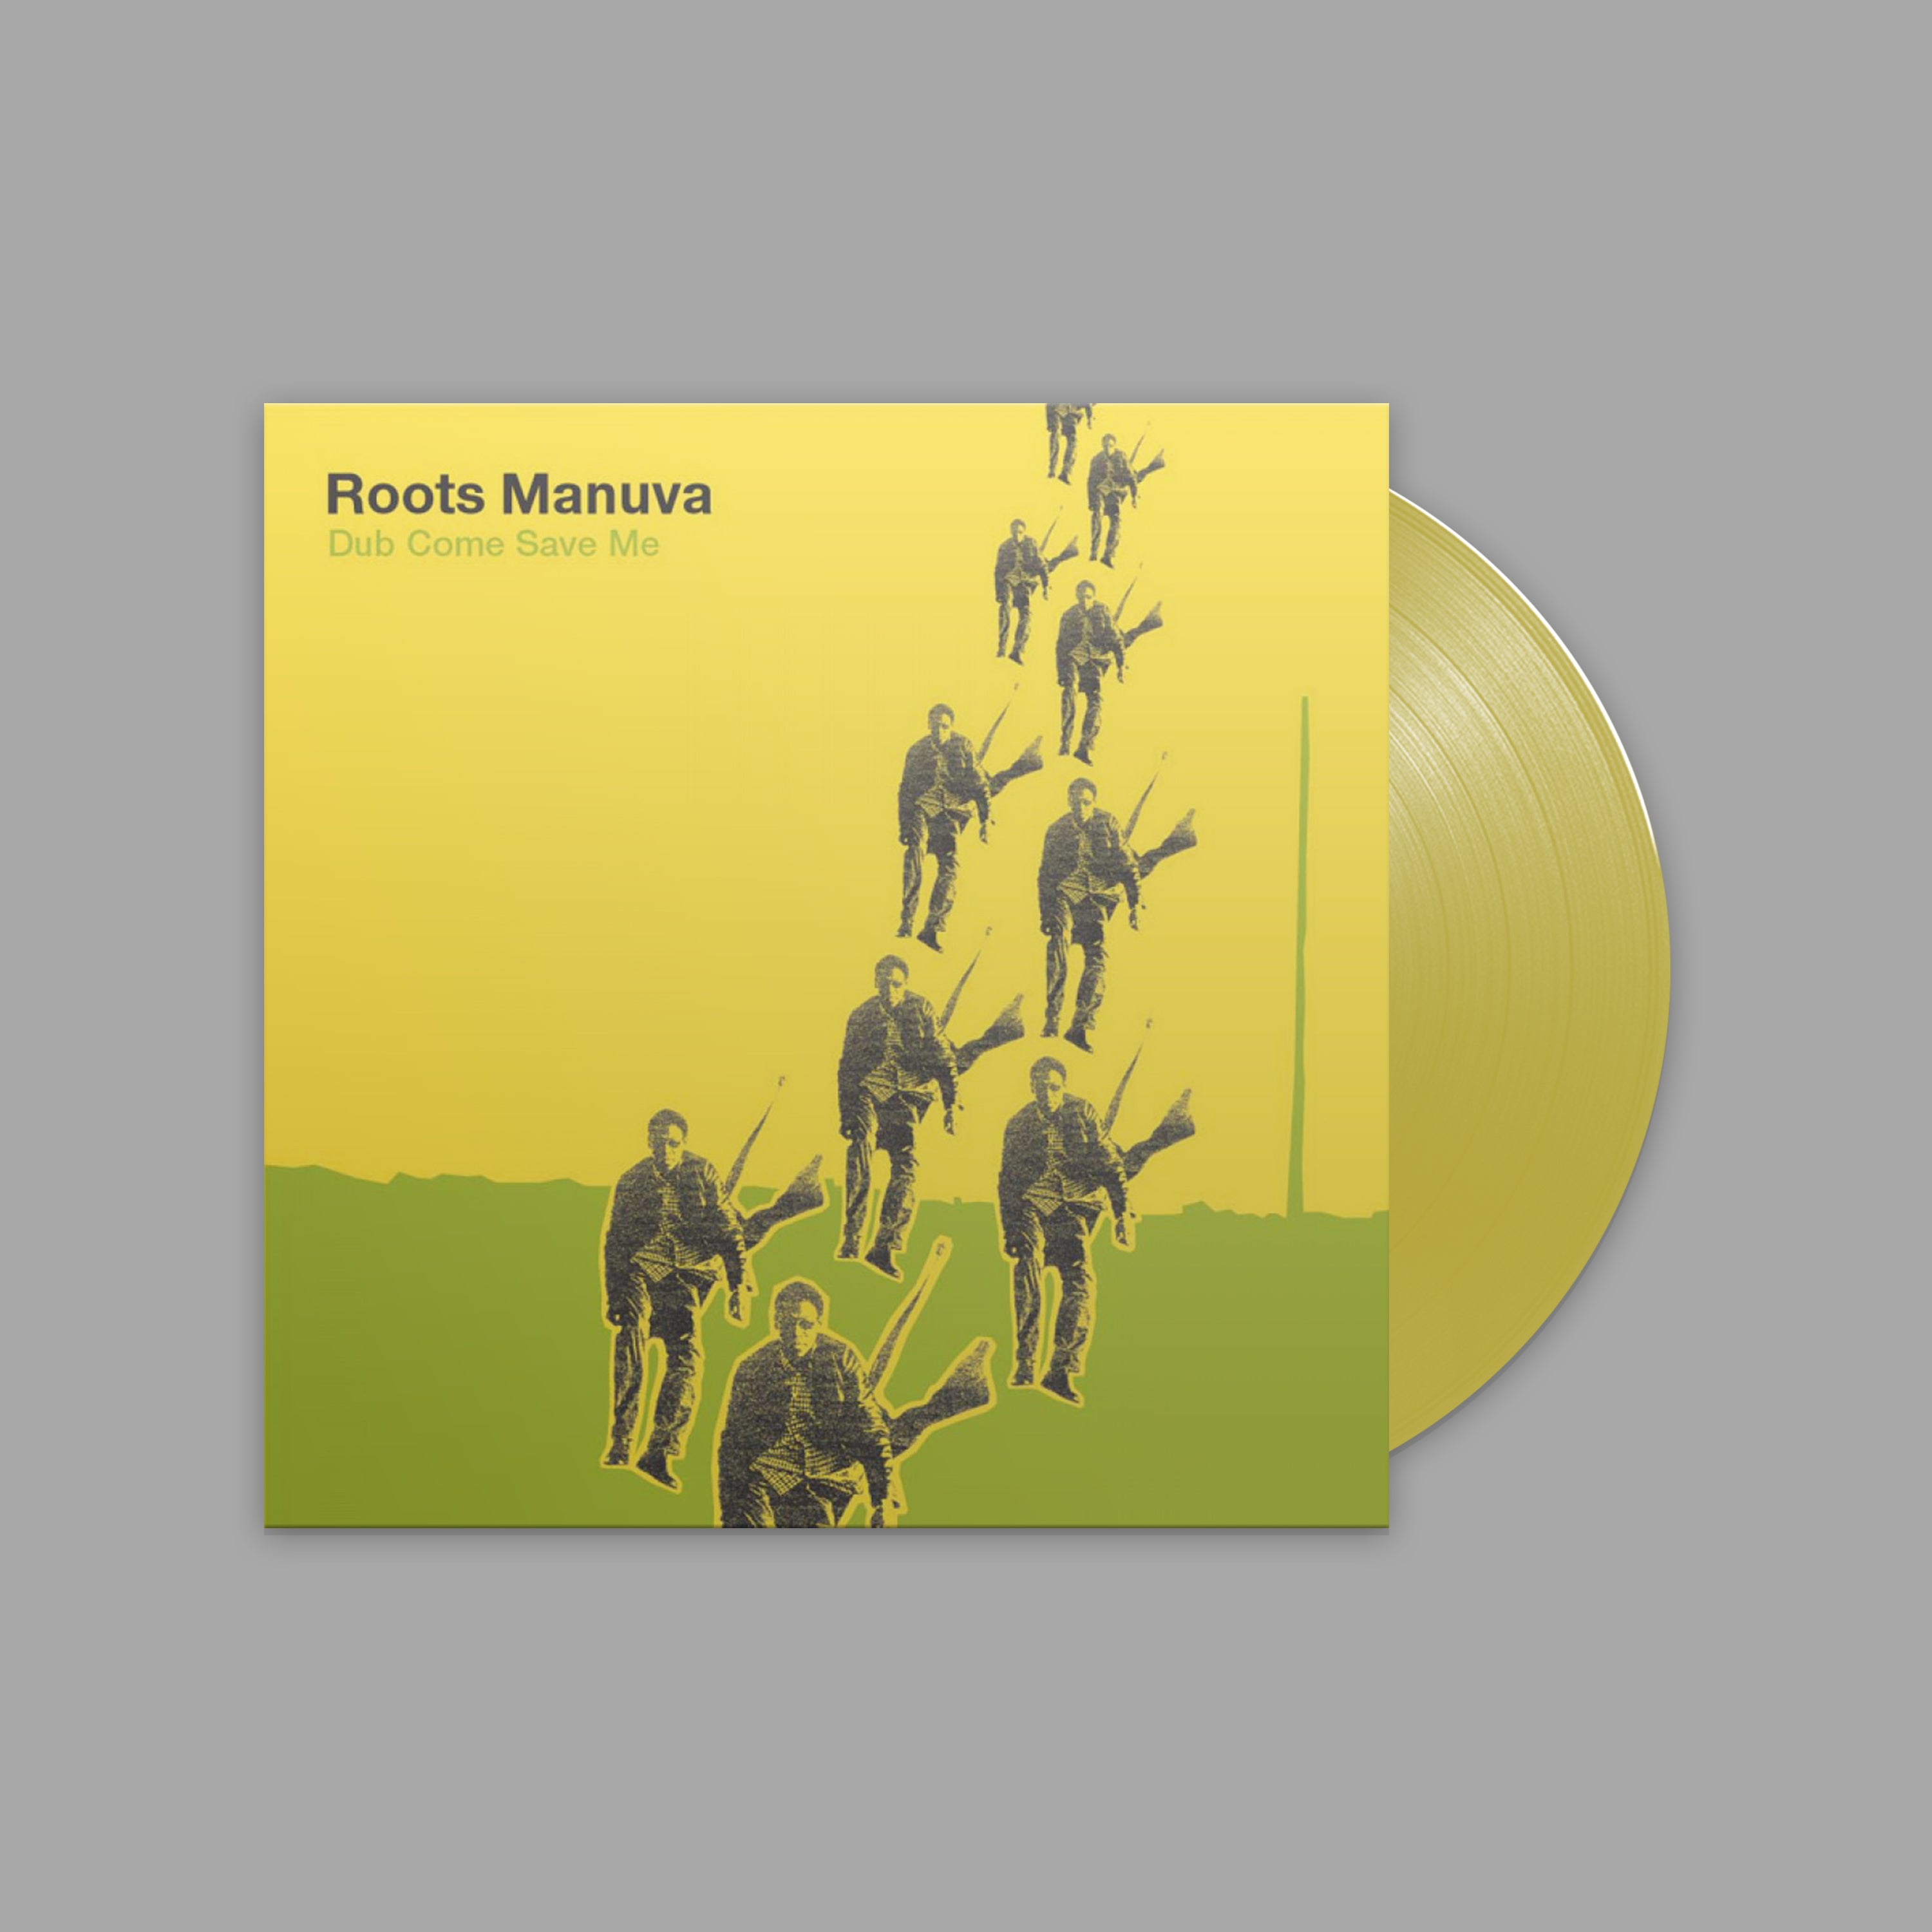 Roots Manuva - Dub Come Save Me: Limited Yellow Vinyl 2LP